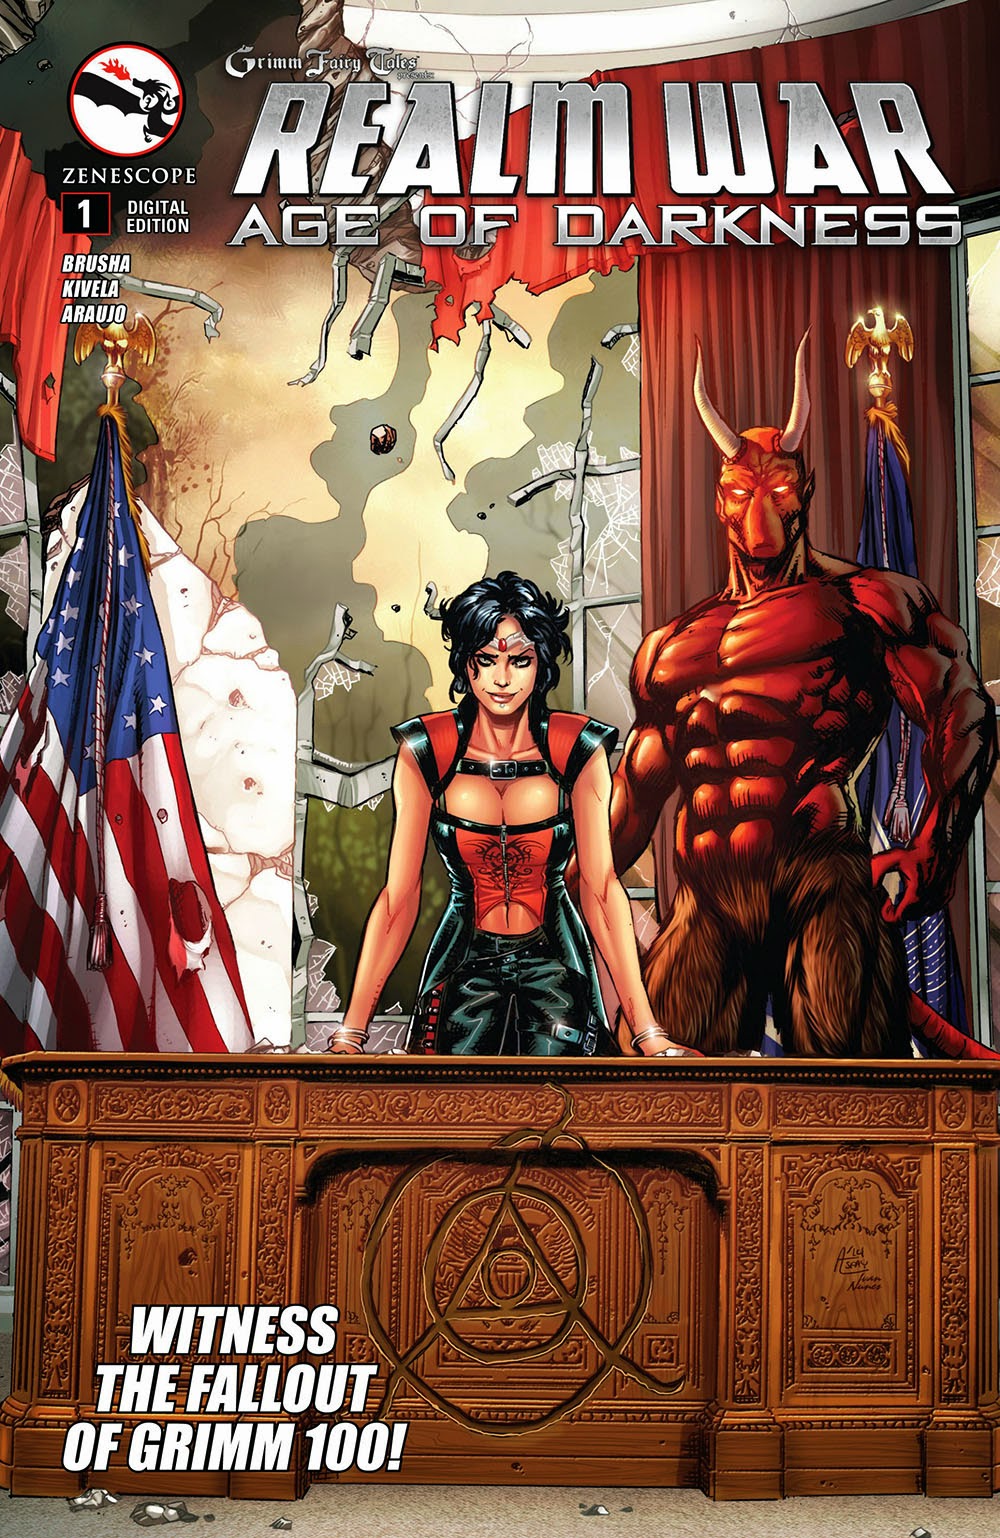 Grimm Fairy Tales Realm War Age of Darkness 4 Cover C